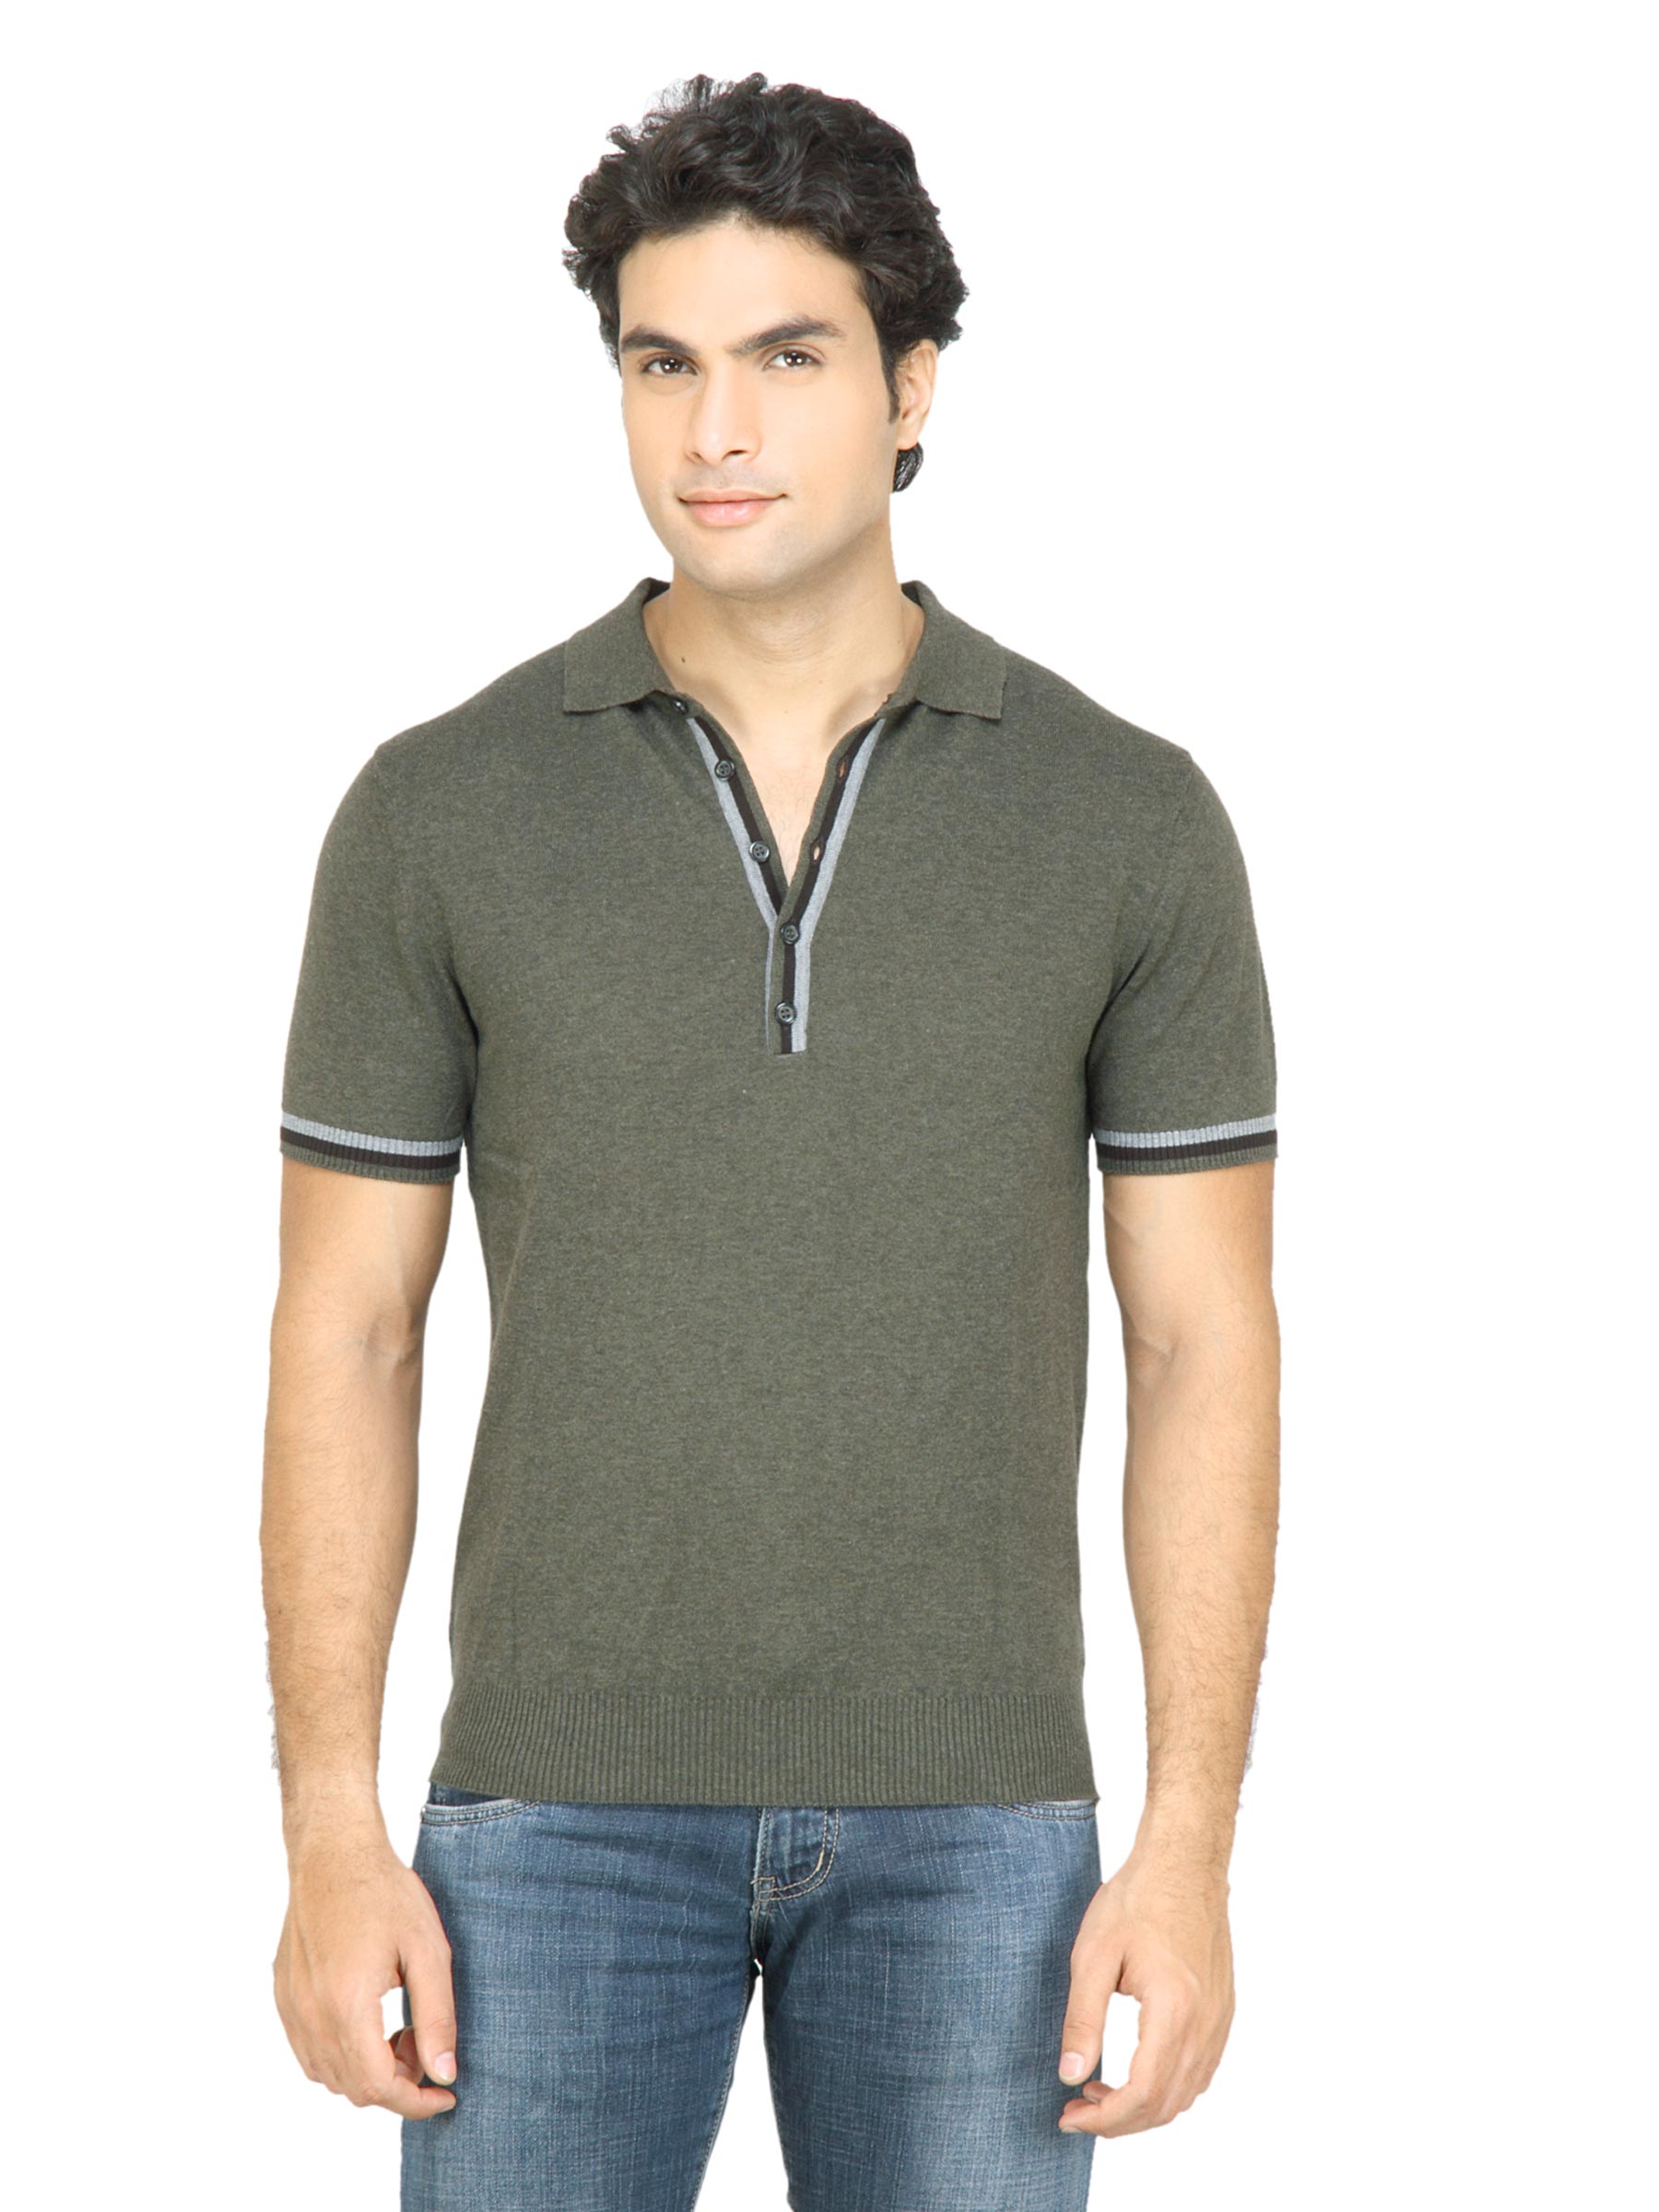 United Colors of Benetton Men Solid Olive Sweater